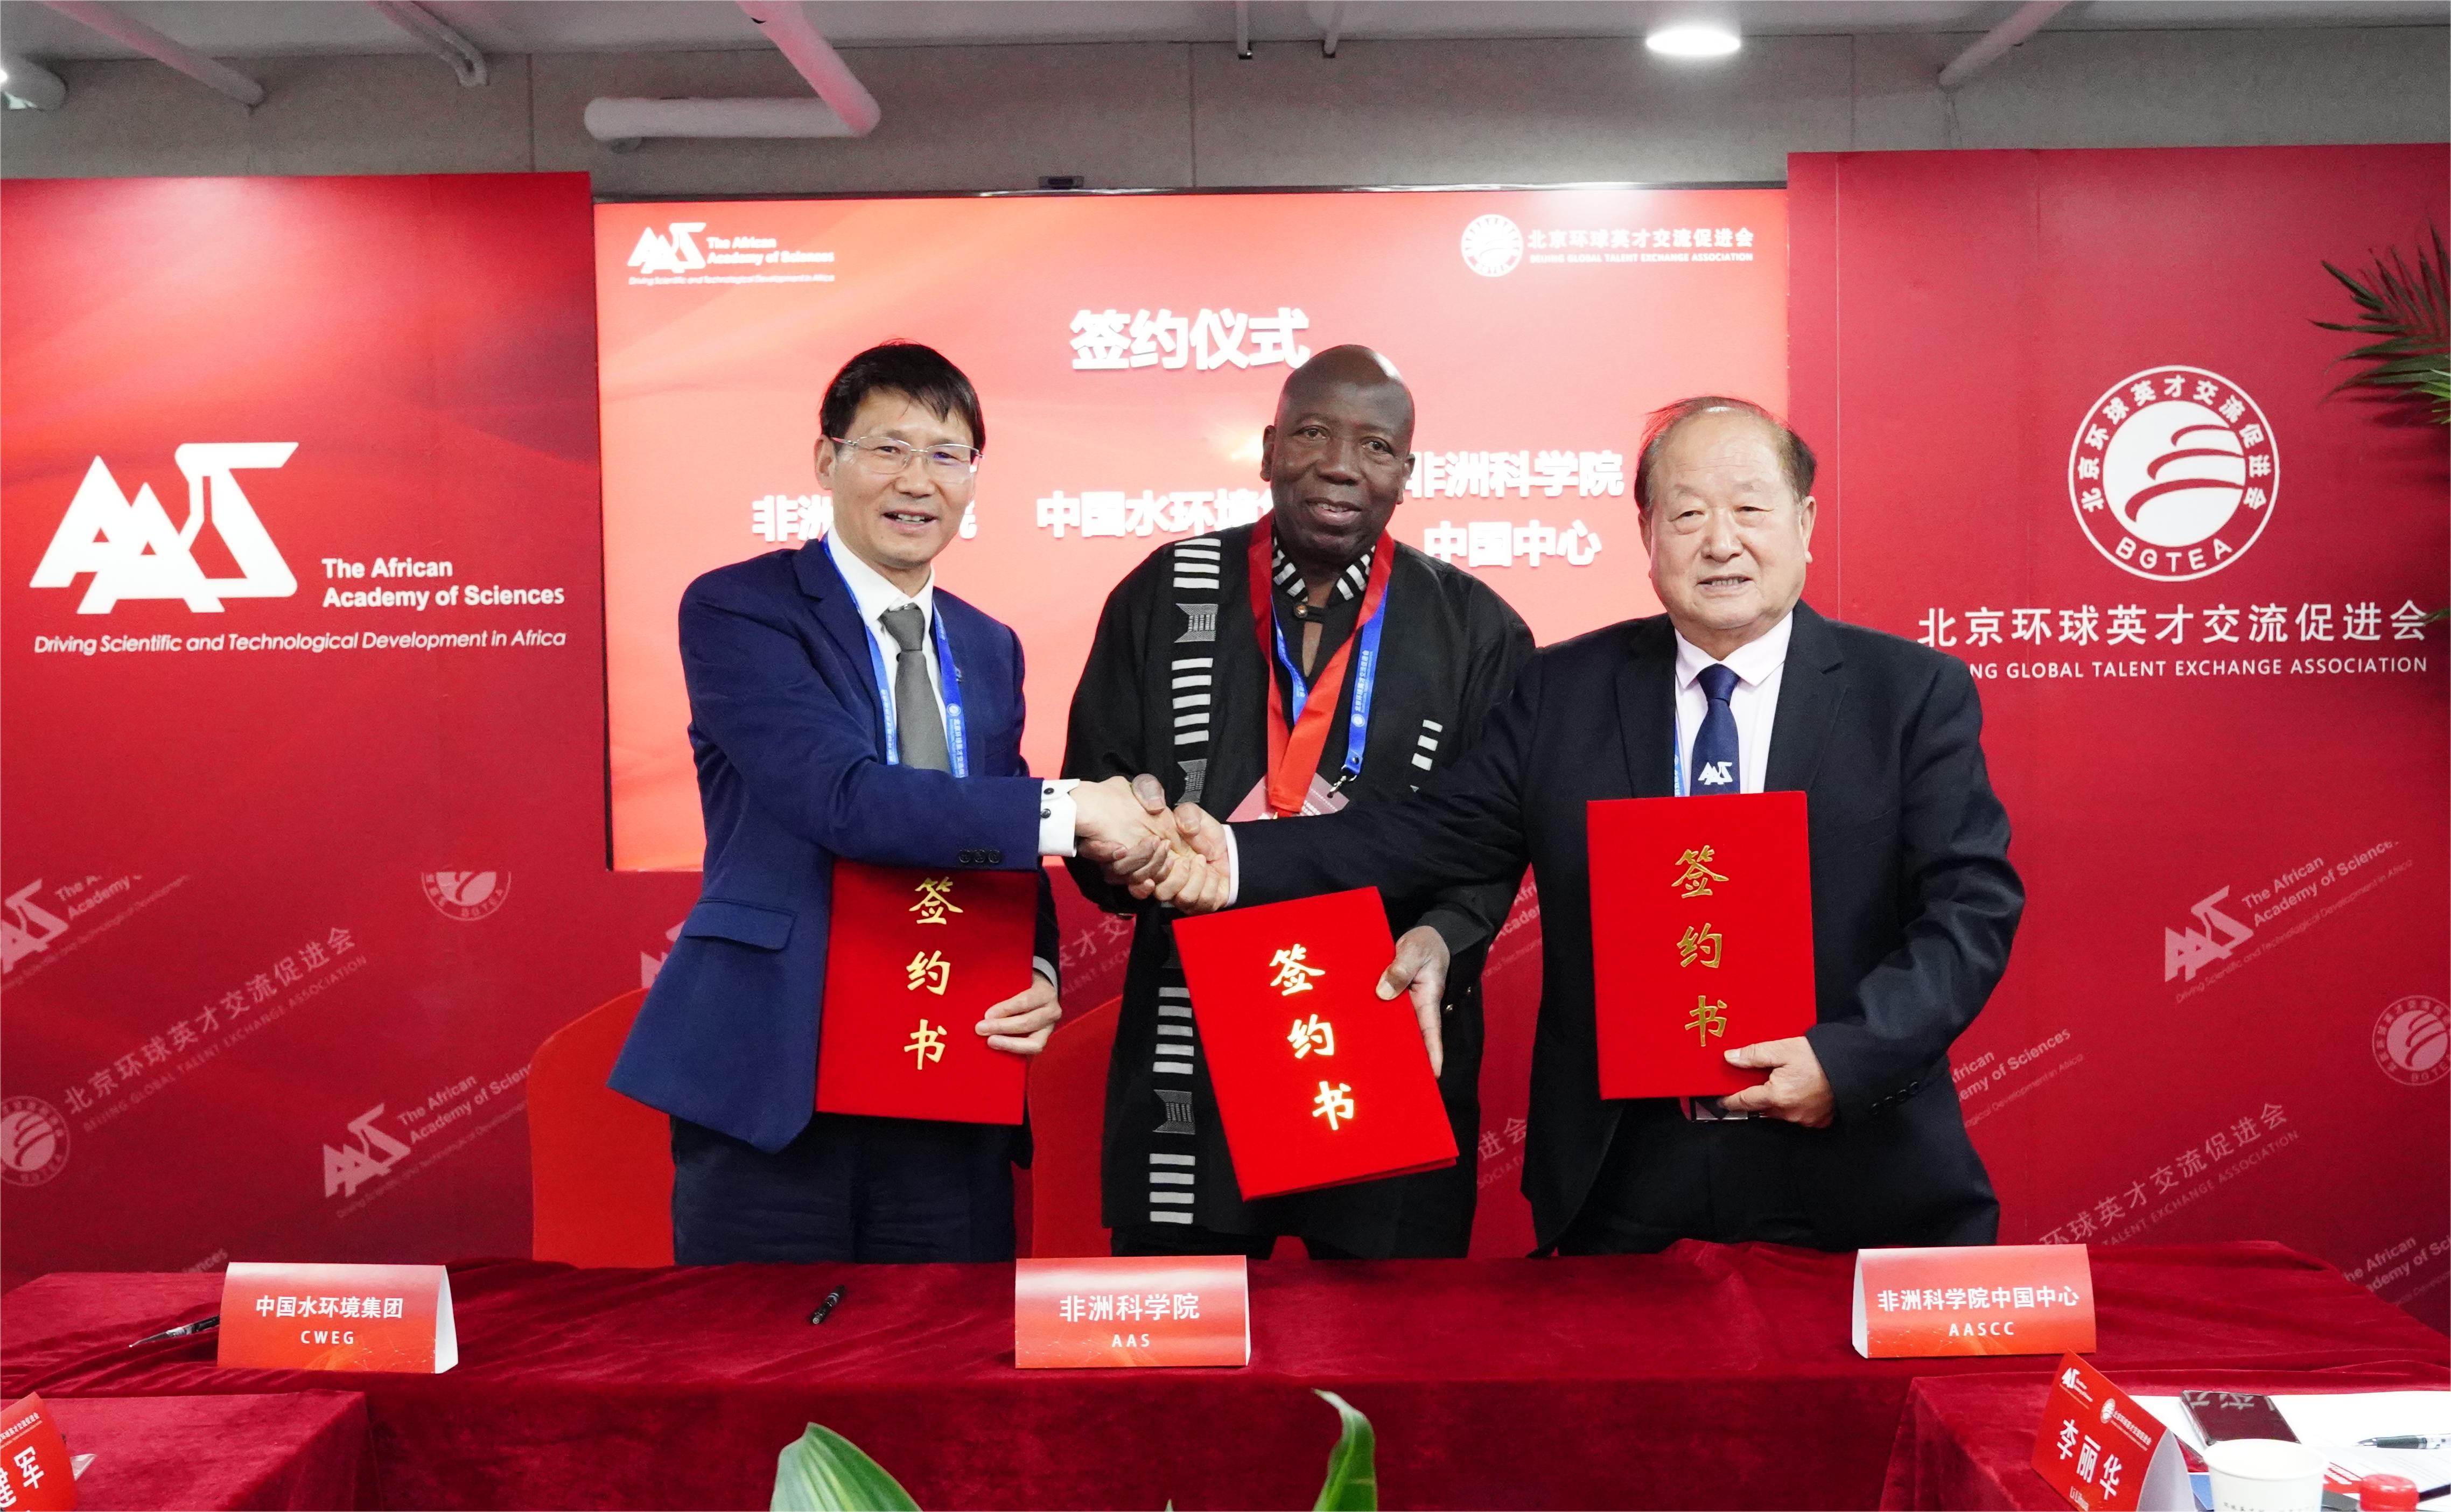 The African Academy of Sciences, its China Center and China Water Environment Group signed a strategic cooperation agreement in Beijing, China, November 13, 2022. /CGTN